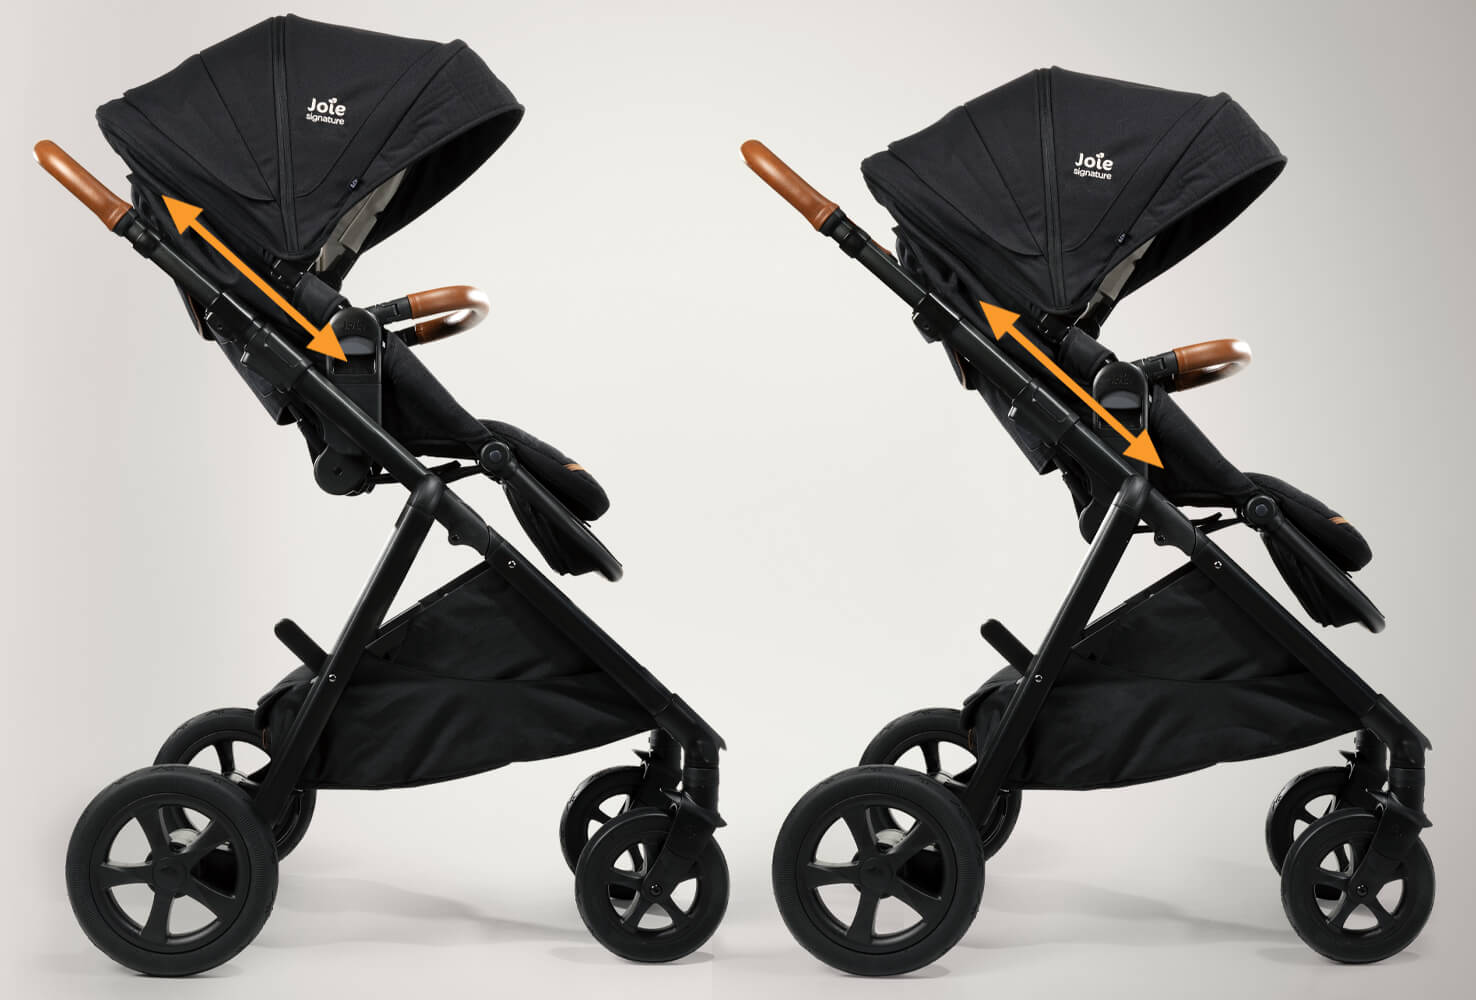   Joie aeria pram in light gray seat height being raised by model.